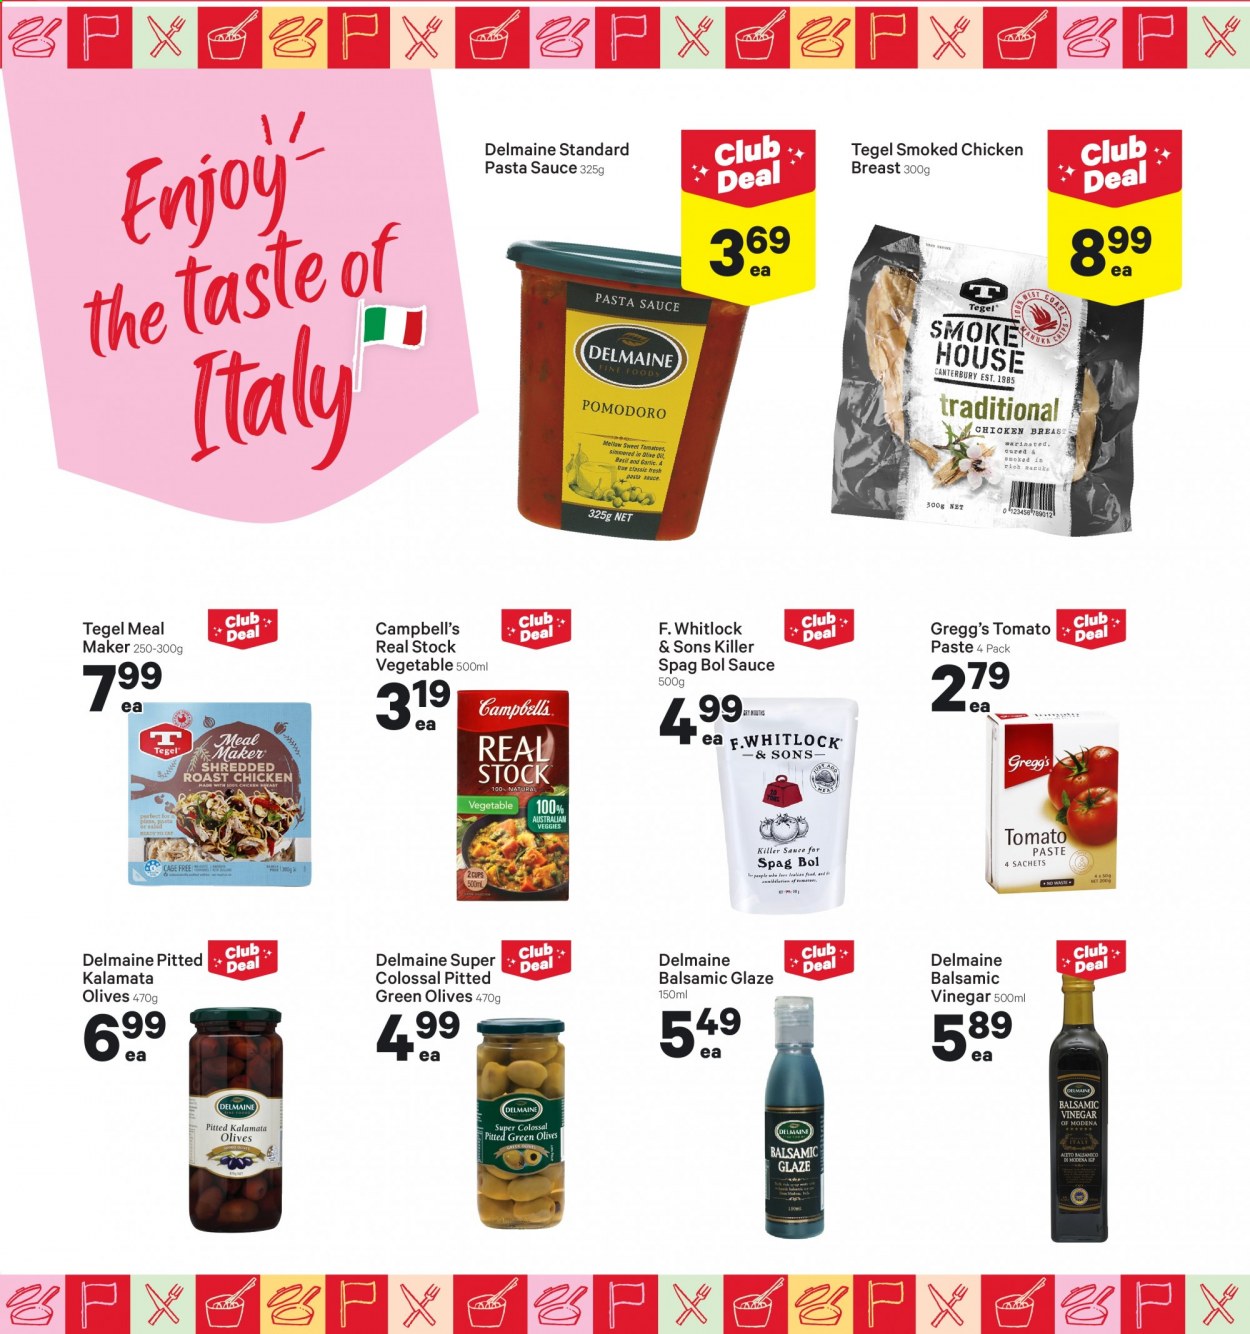 thumbnail - New World mailer - 26.07.2021 - 01.08.2021 - Sales products - garlic, Campbell's, pizza, chicken roast, pasta sauce, Delmaine, cage free eggs, tomato paste, olives, balsamic glaze, balsamic vinegar, vinegar, chicken breasts. Page 4.